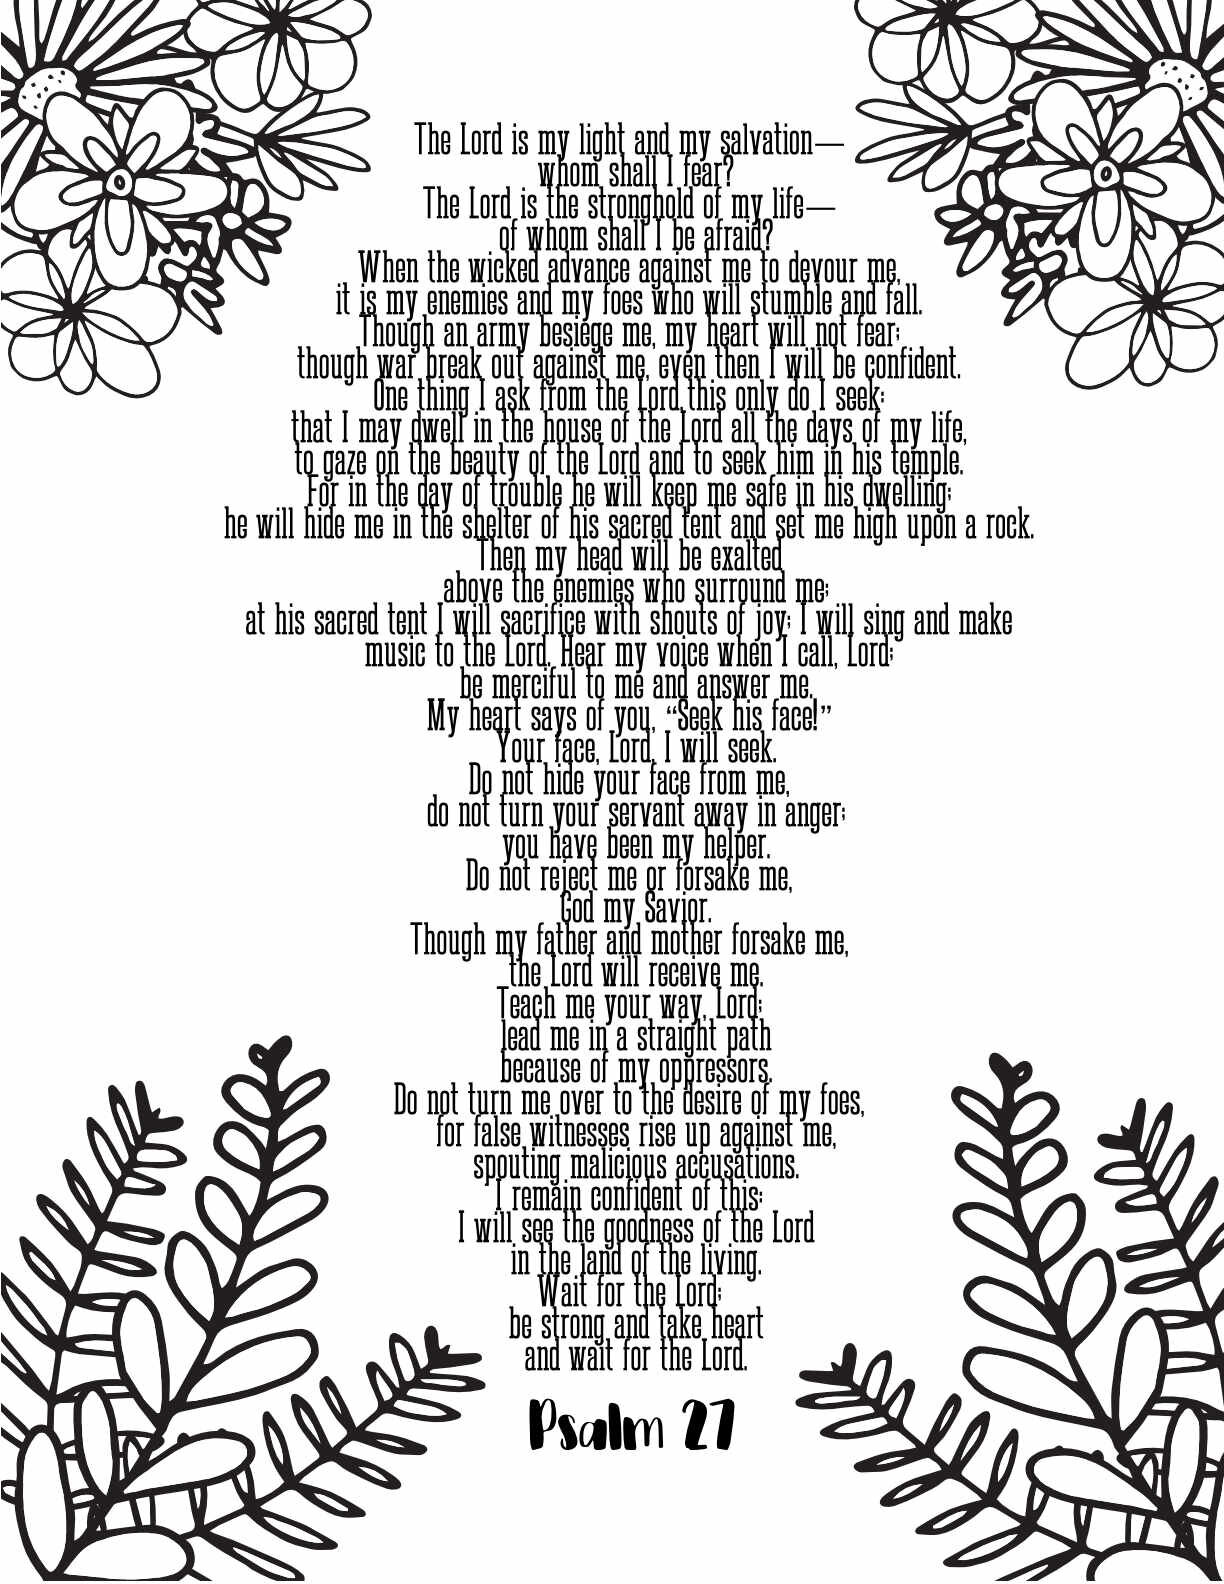 10 Free Printable Psalm Coloring Pages - Download and Color Adult Scripture - Psalm 27 CLICK HERE TO DOWNLOAD THIS PAGE FREE